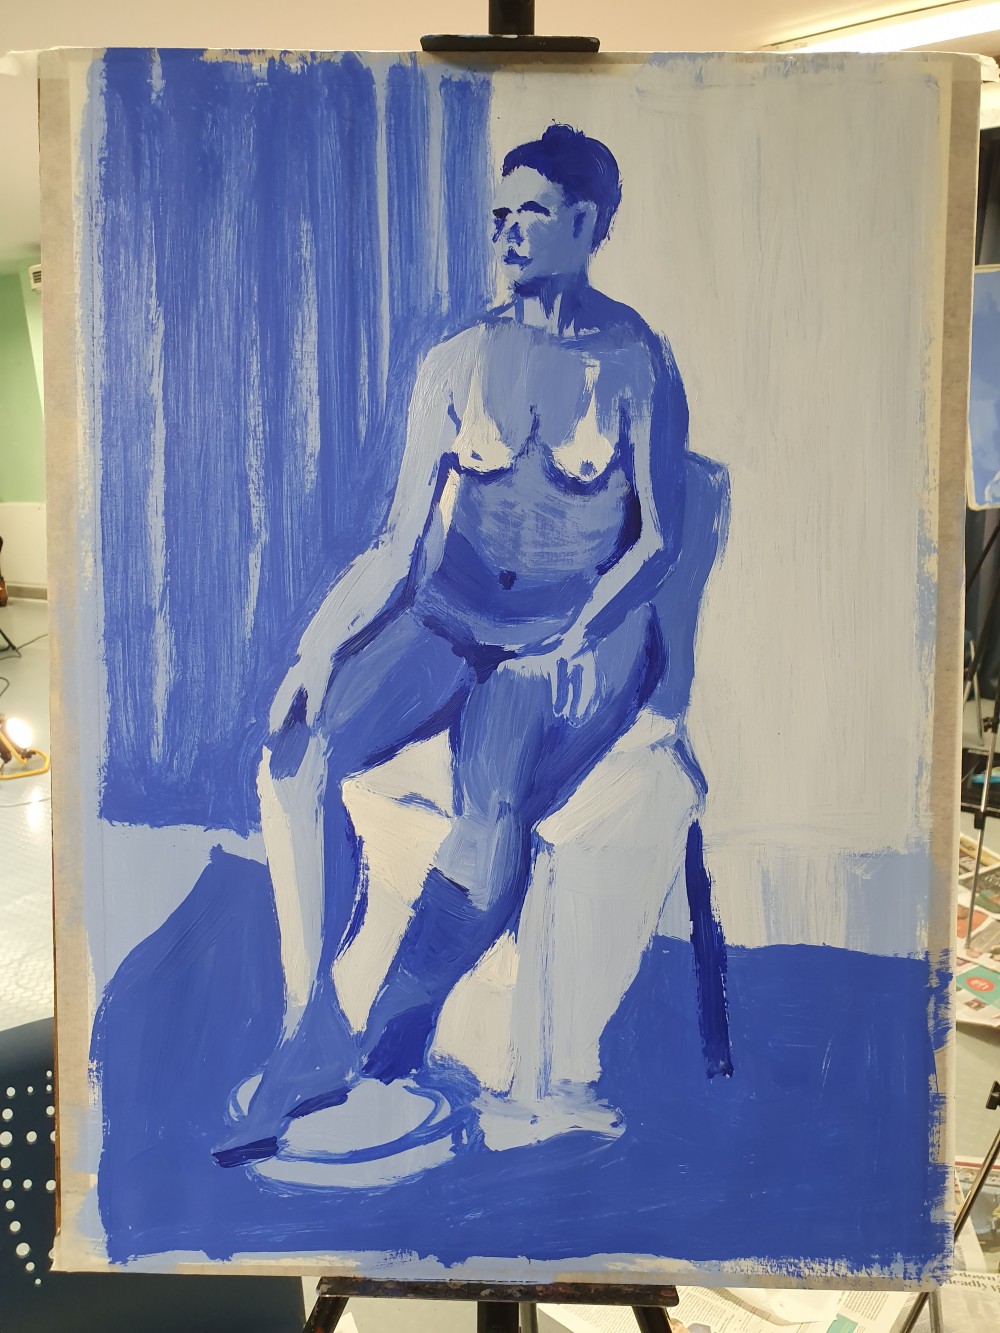 Tonal underpainting in shades of blue